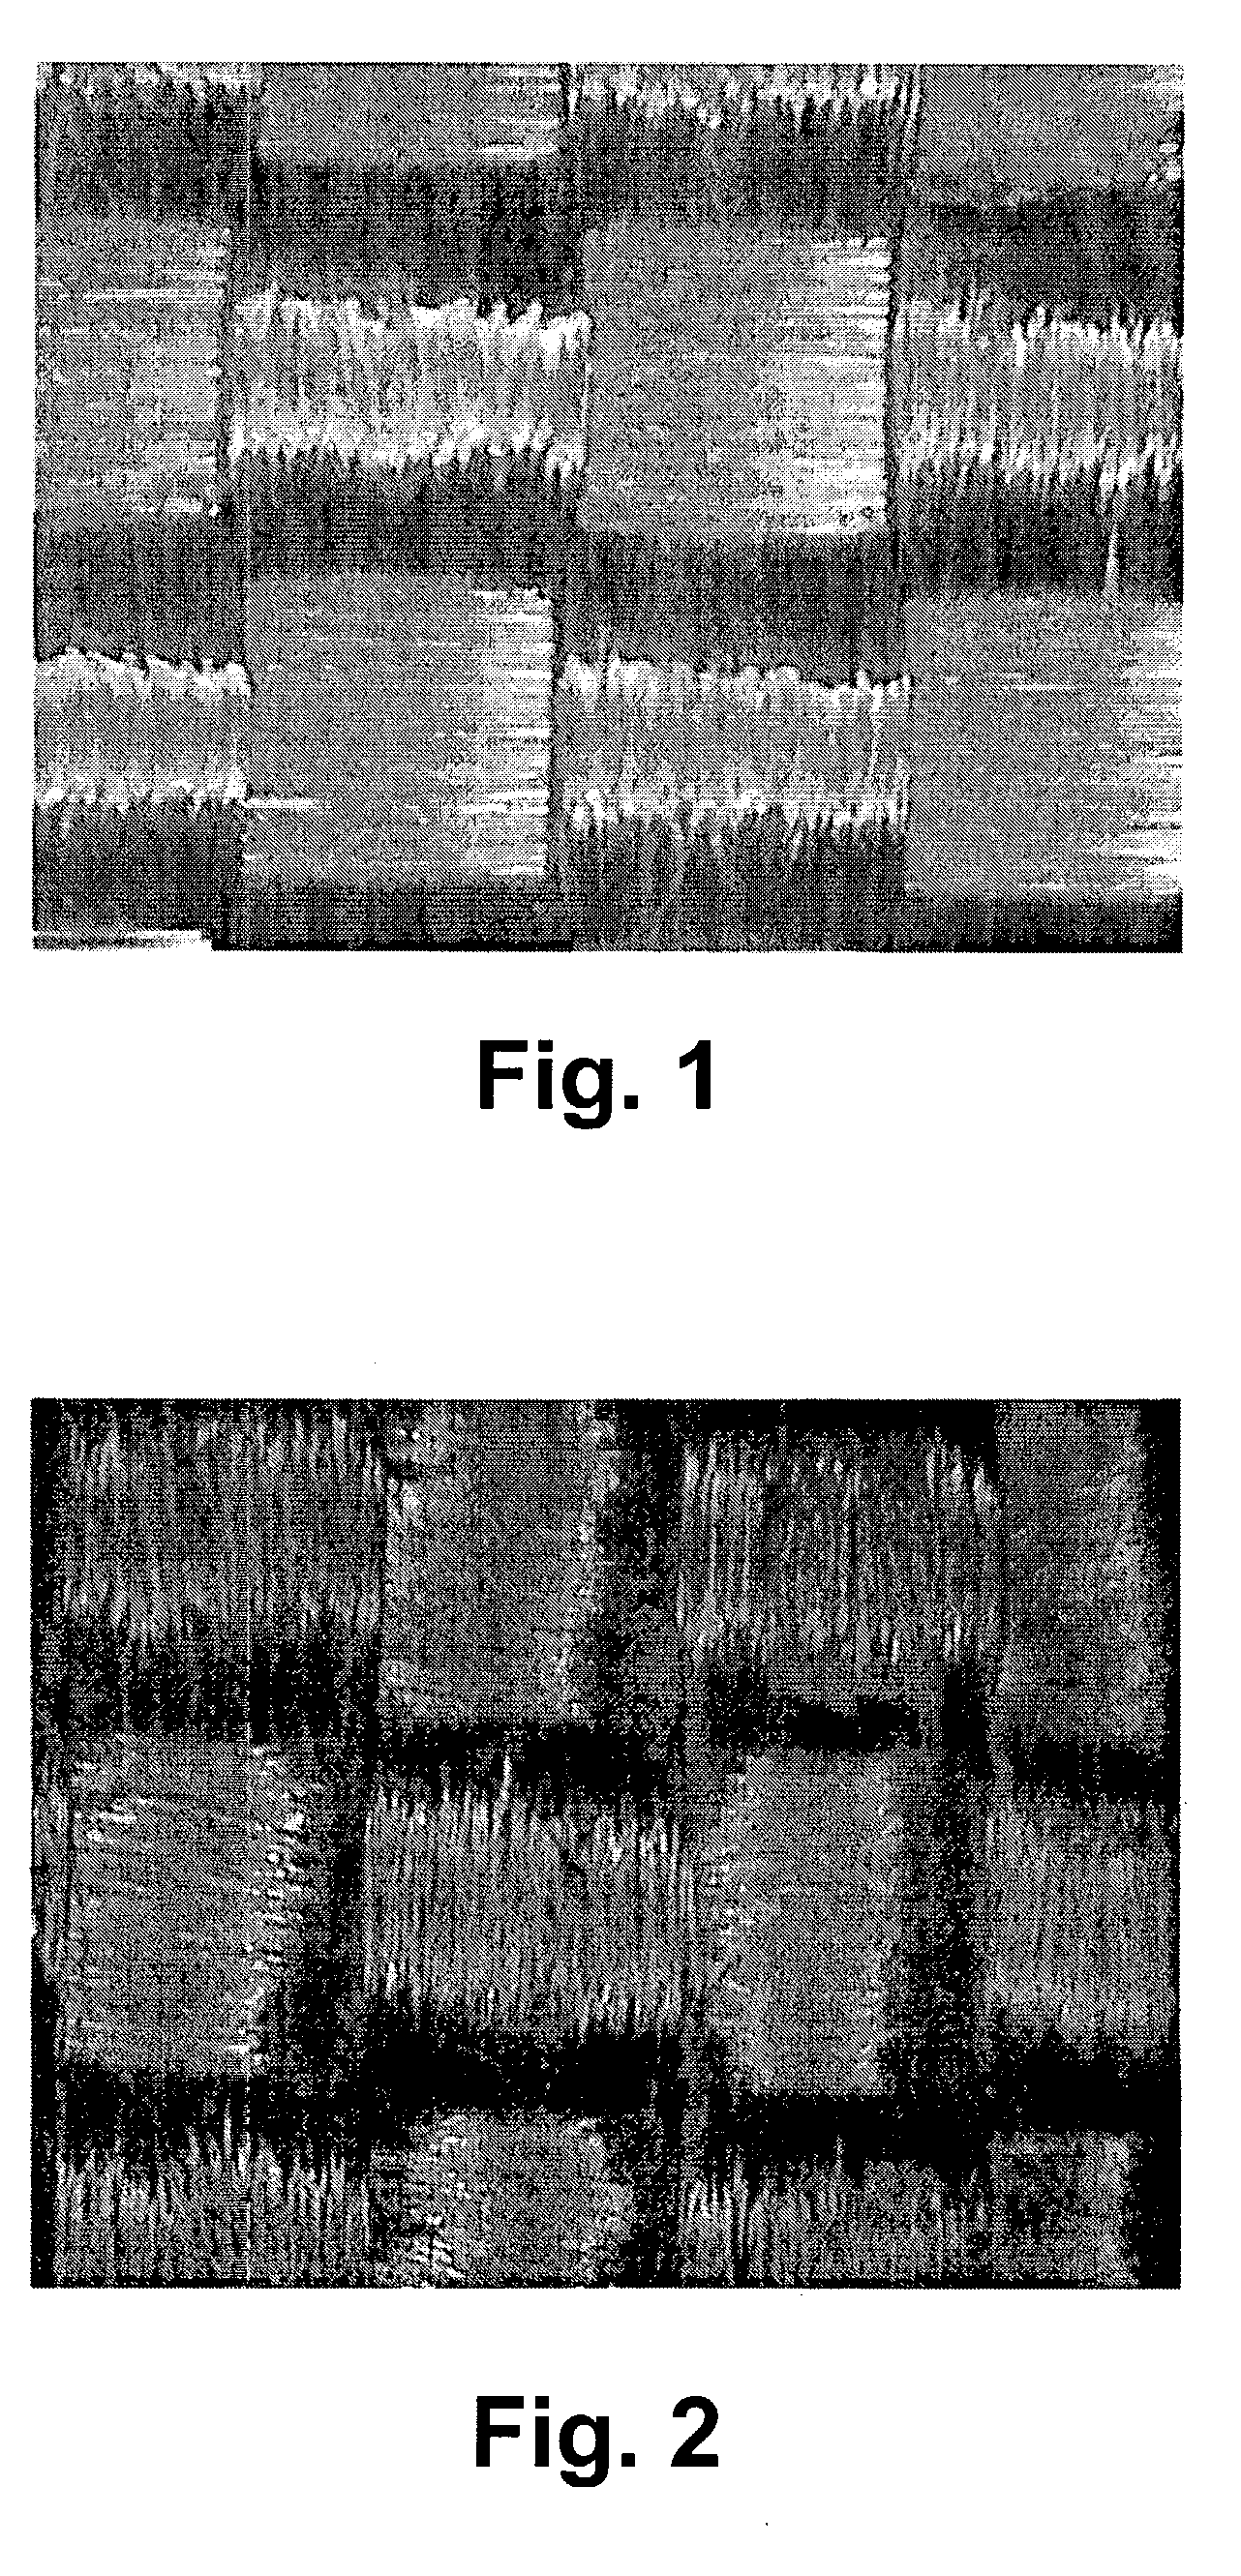 Stab resistant and anti-ballistic material and method of making the same